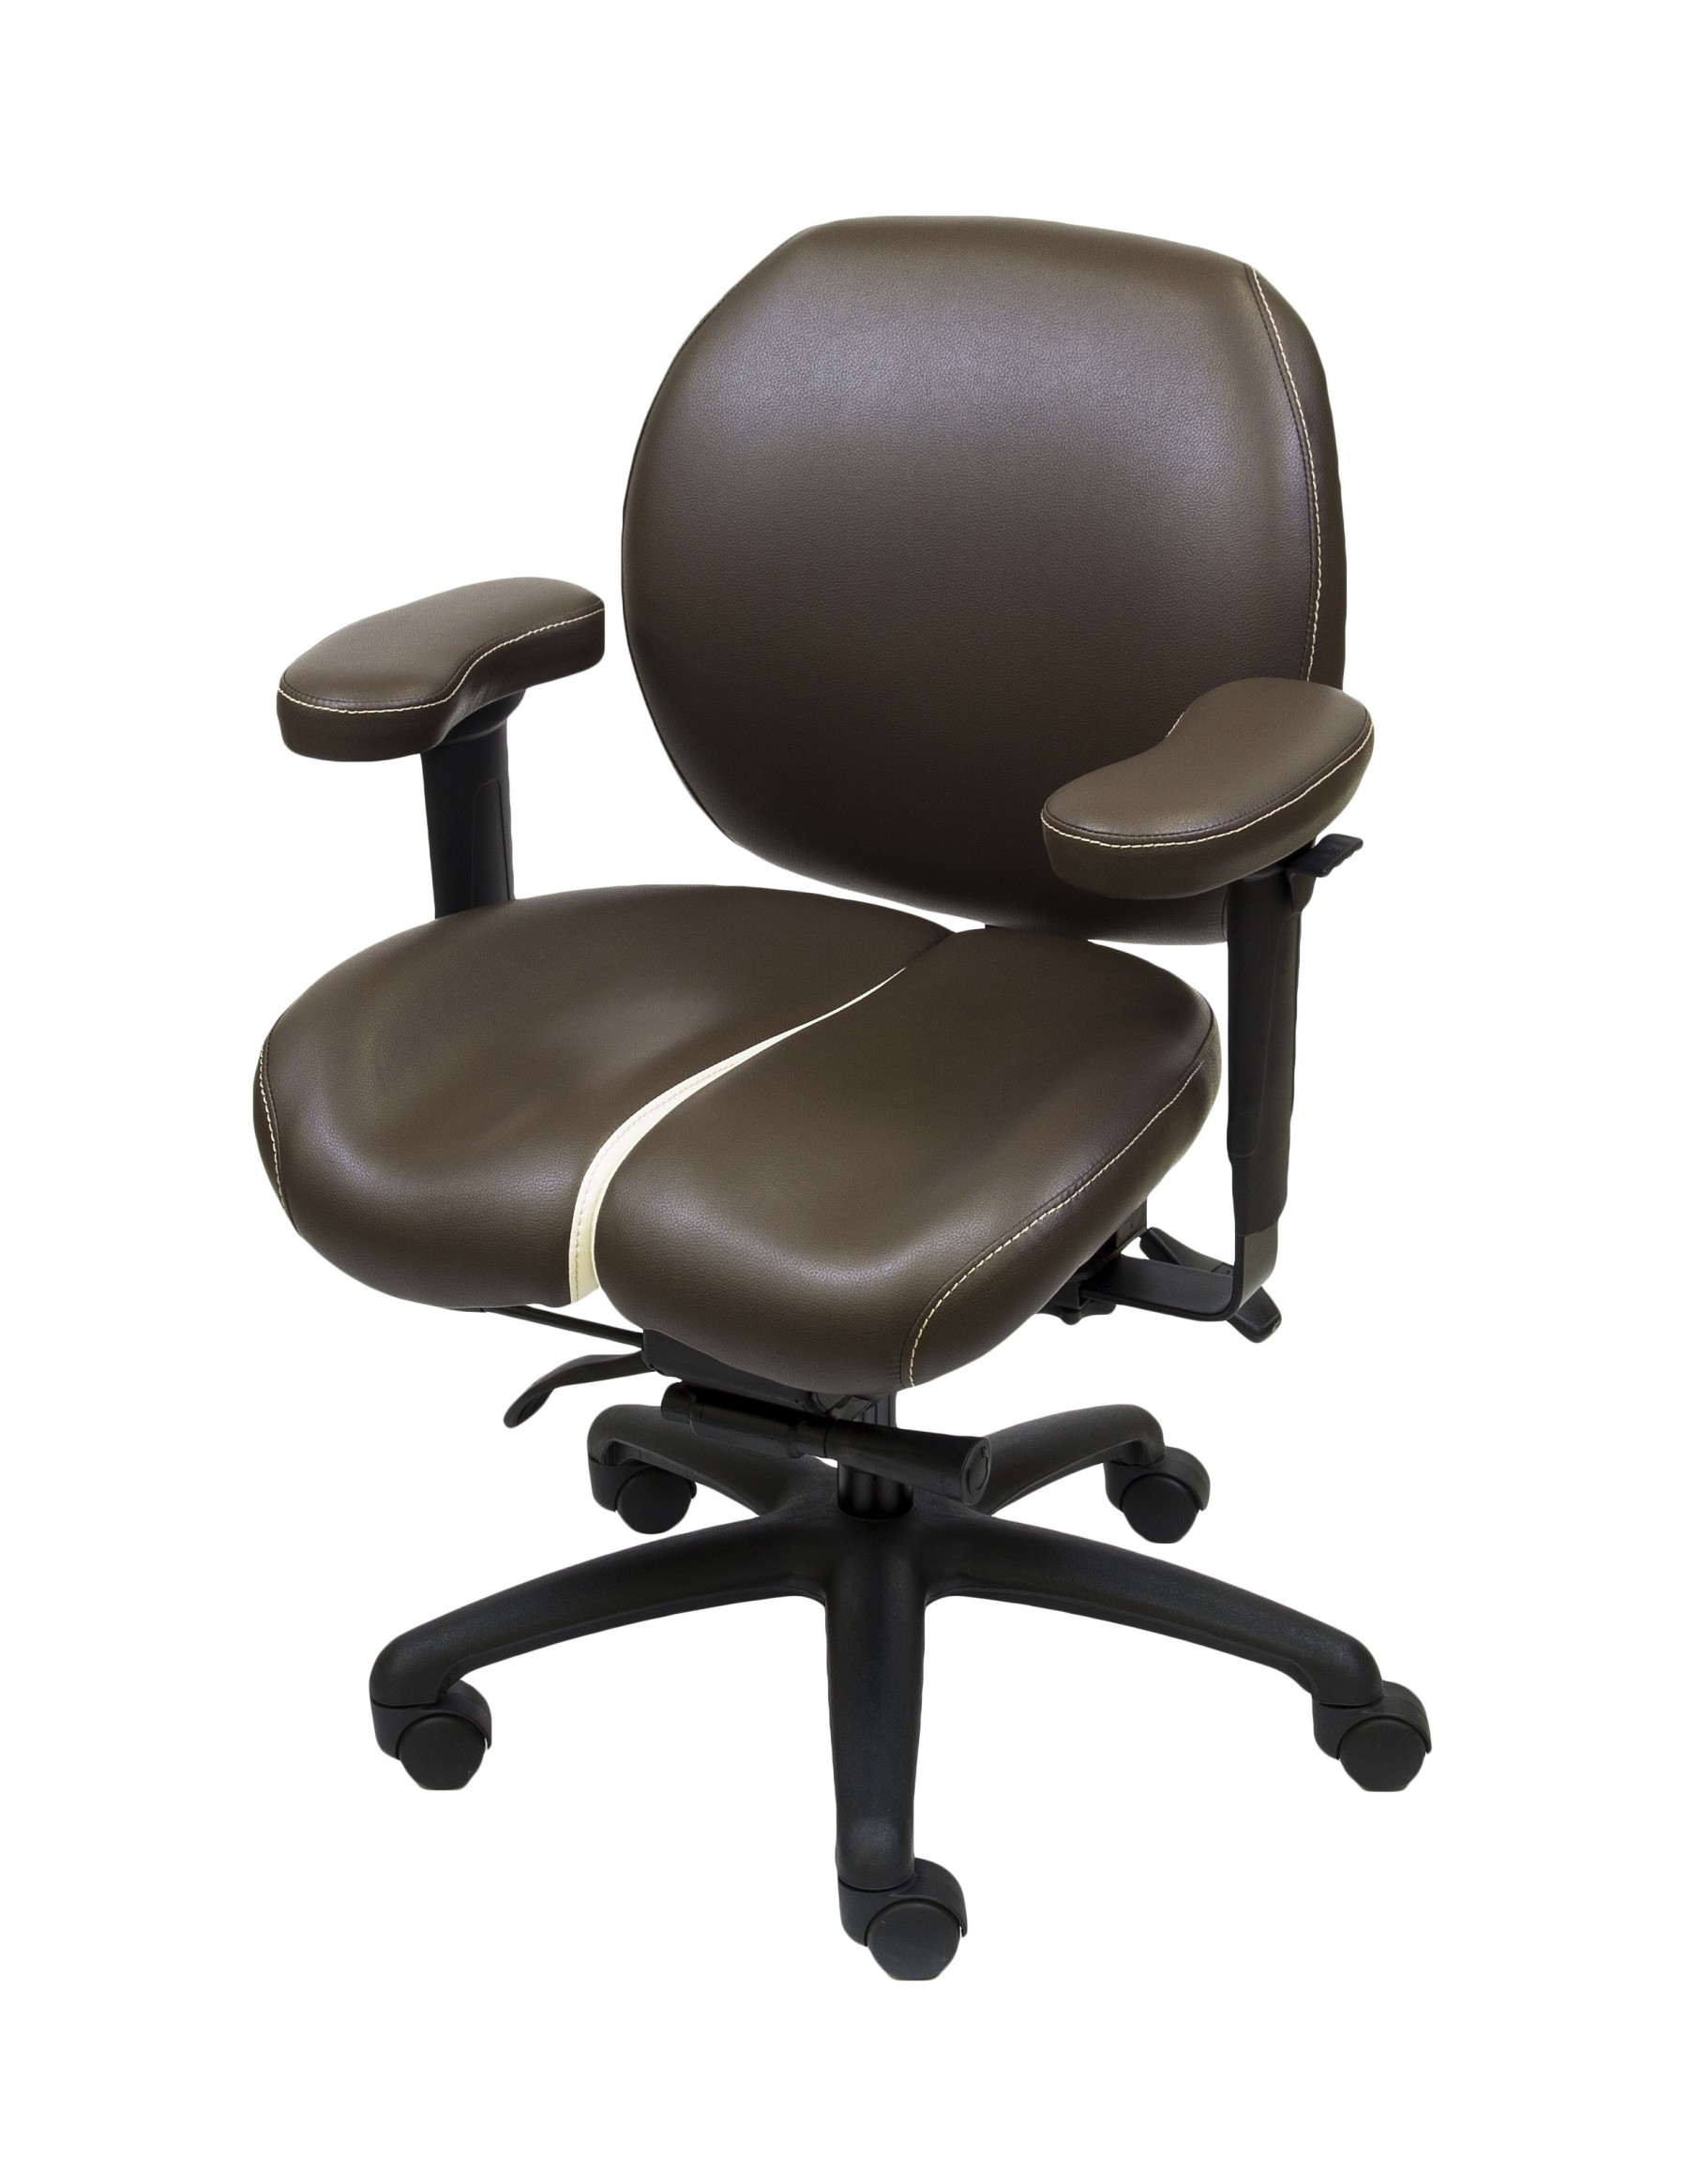 Relax The Back Chair | The Best Chair Review Blog